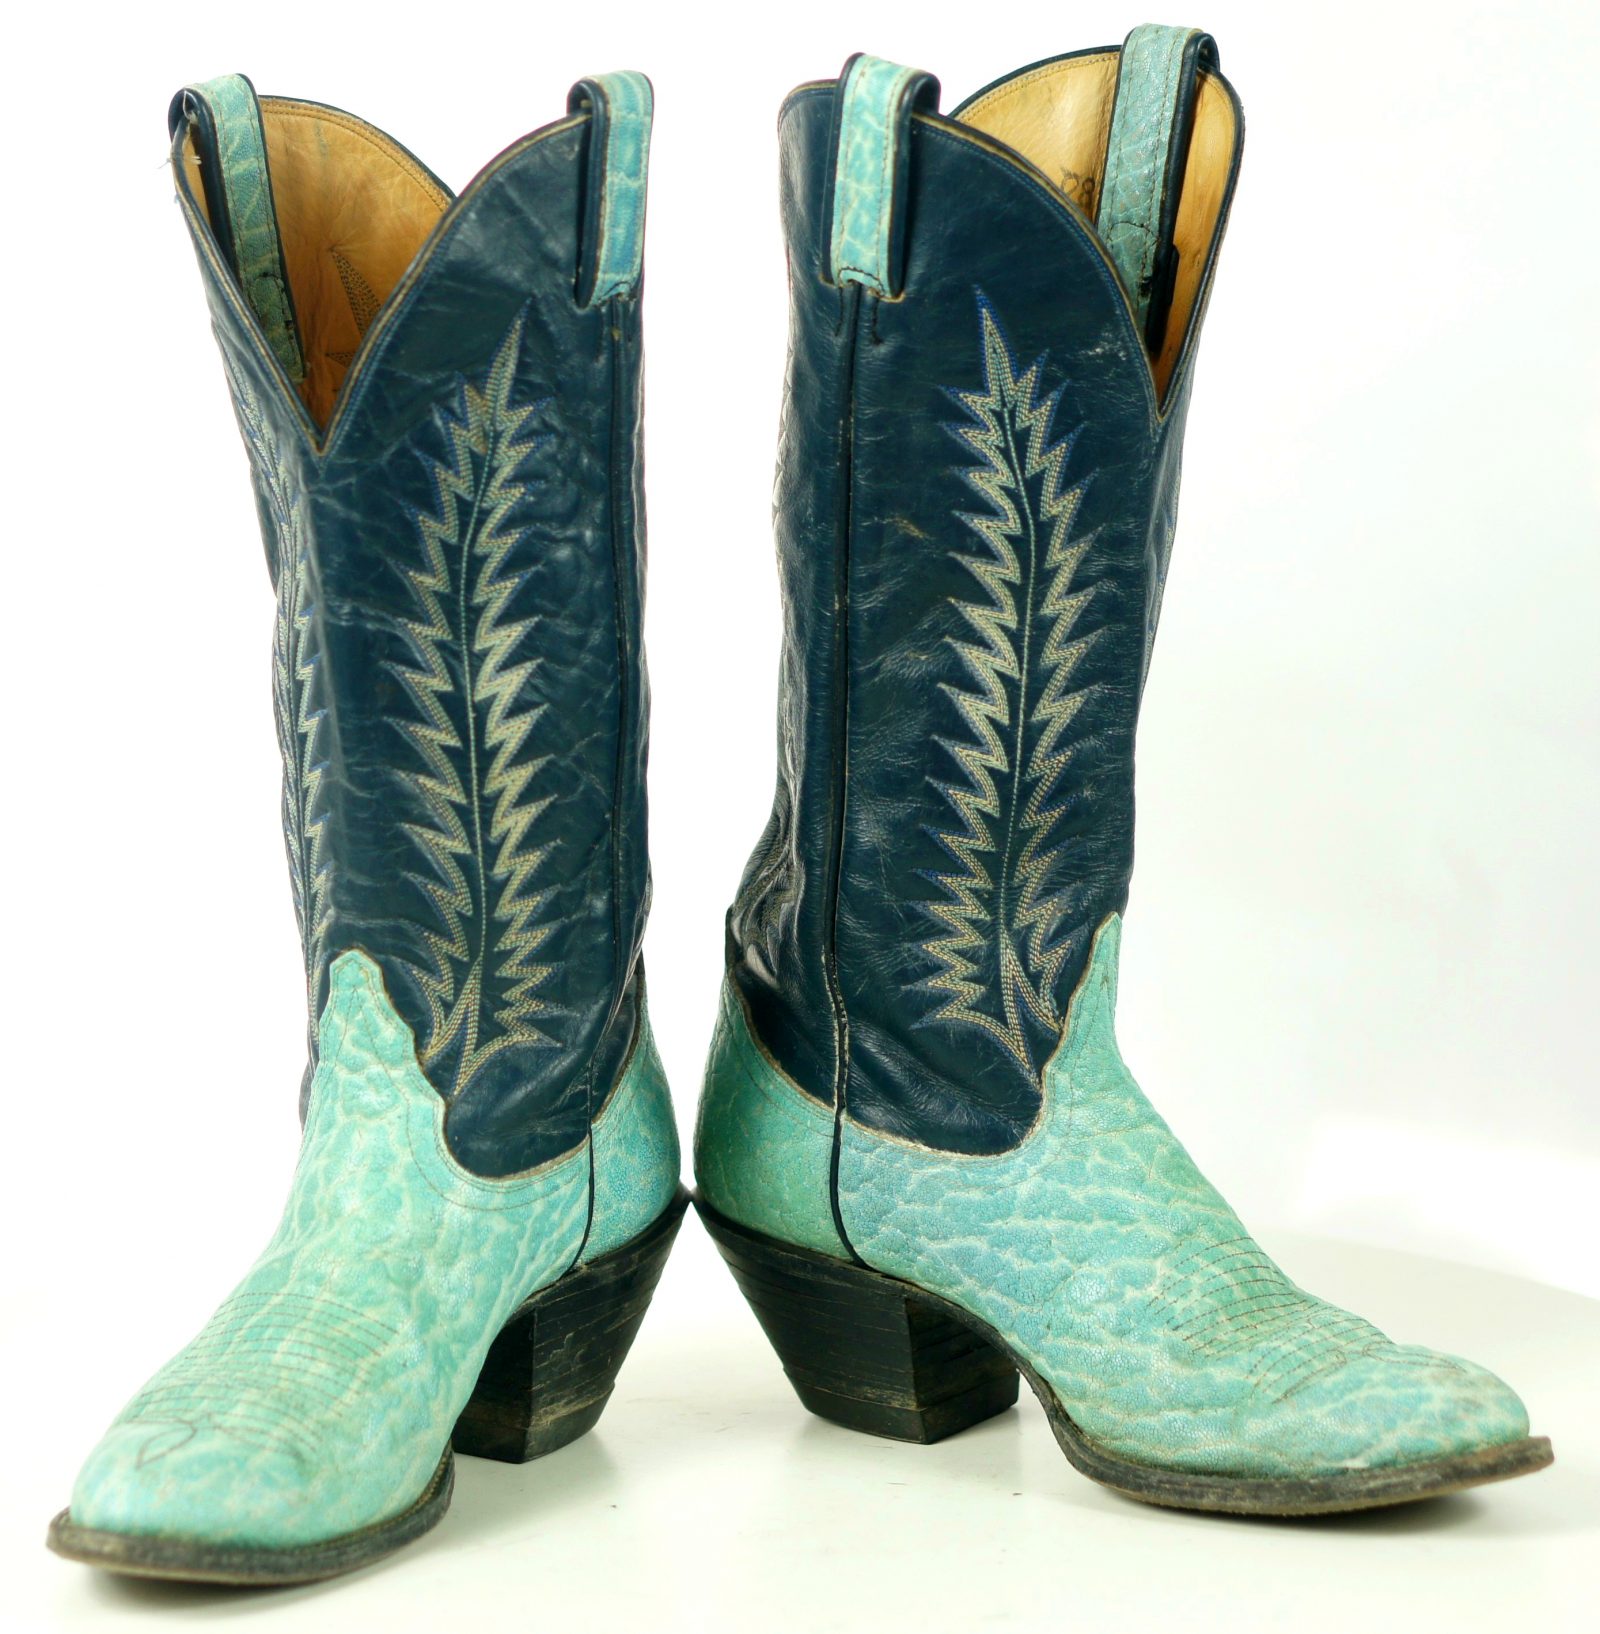 Tony Lama Turquoise And Navy Blue Cowboy Boots Vintage Black Label Womens 8 B (11)